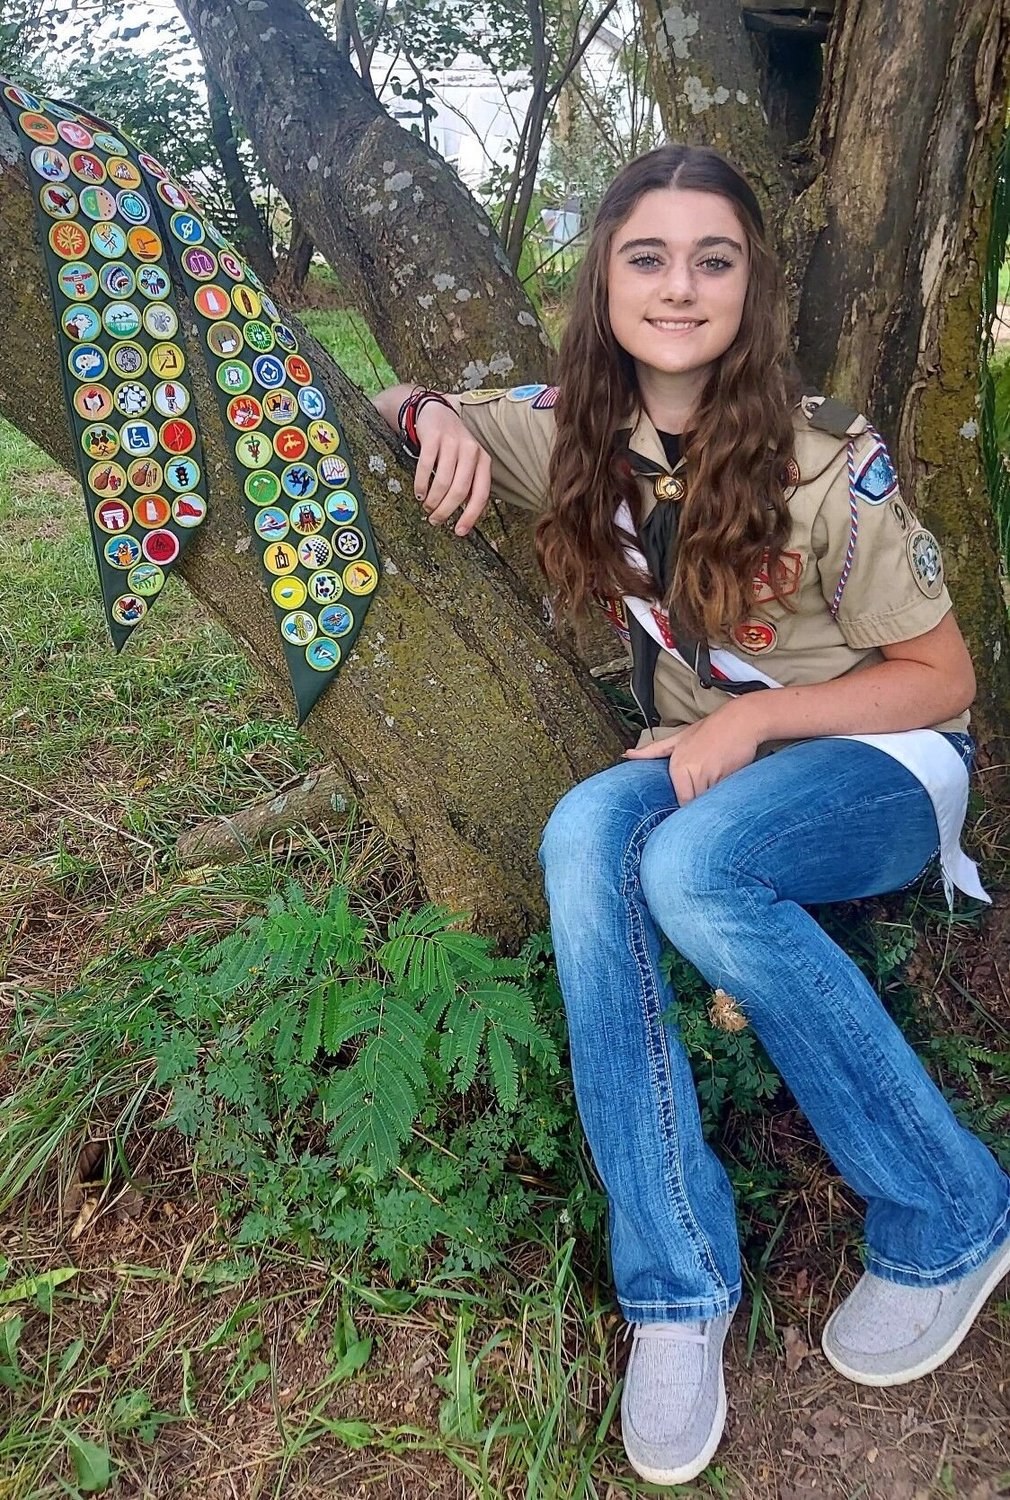 In 2018, the Boys Scouts of America (BSA) expanded its program to girls, encouraging them to participate in the many programs and opportunities BSA offers. There are 138 merit badges that a BSA Scout can earn. In Scout history, only 520 scouts have completed all of them. Lilly plans to join that club and currently has 121 merit badges completed.